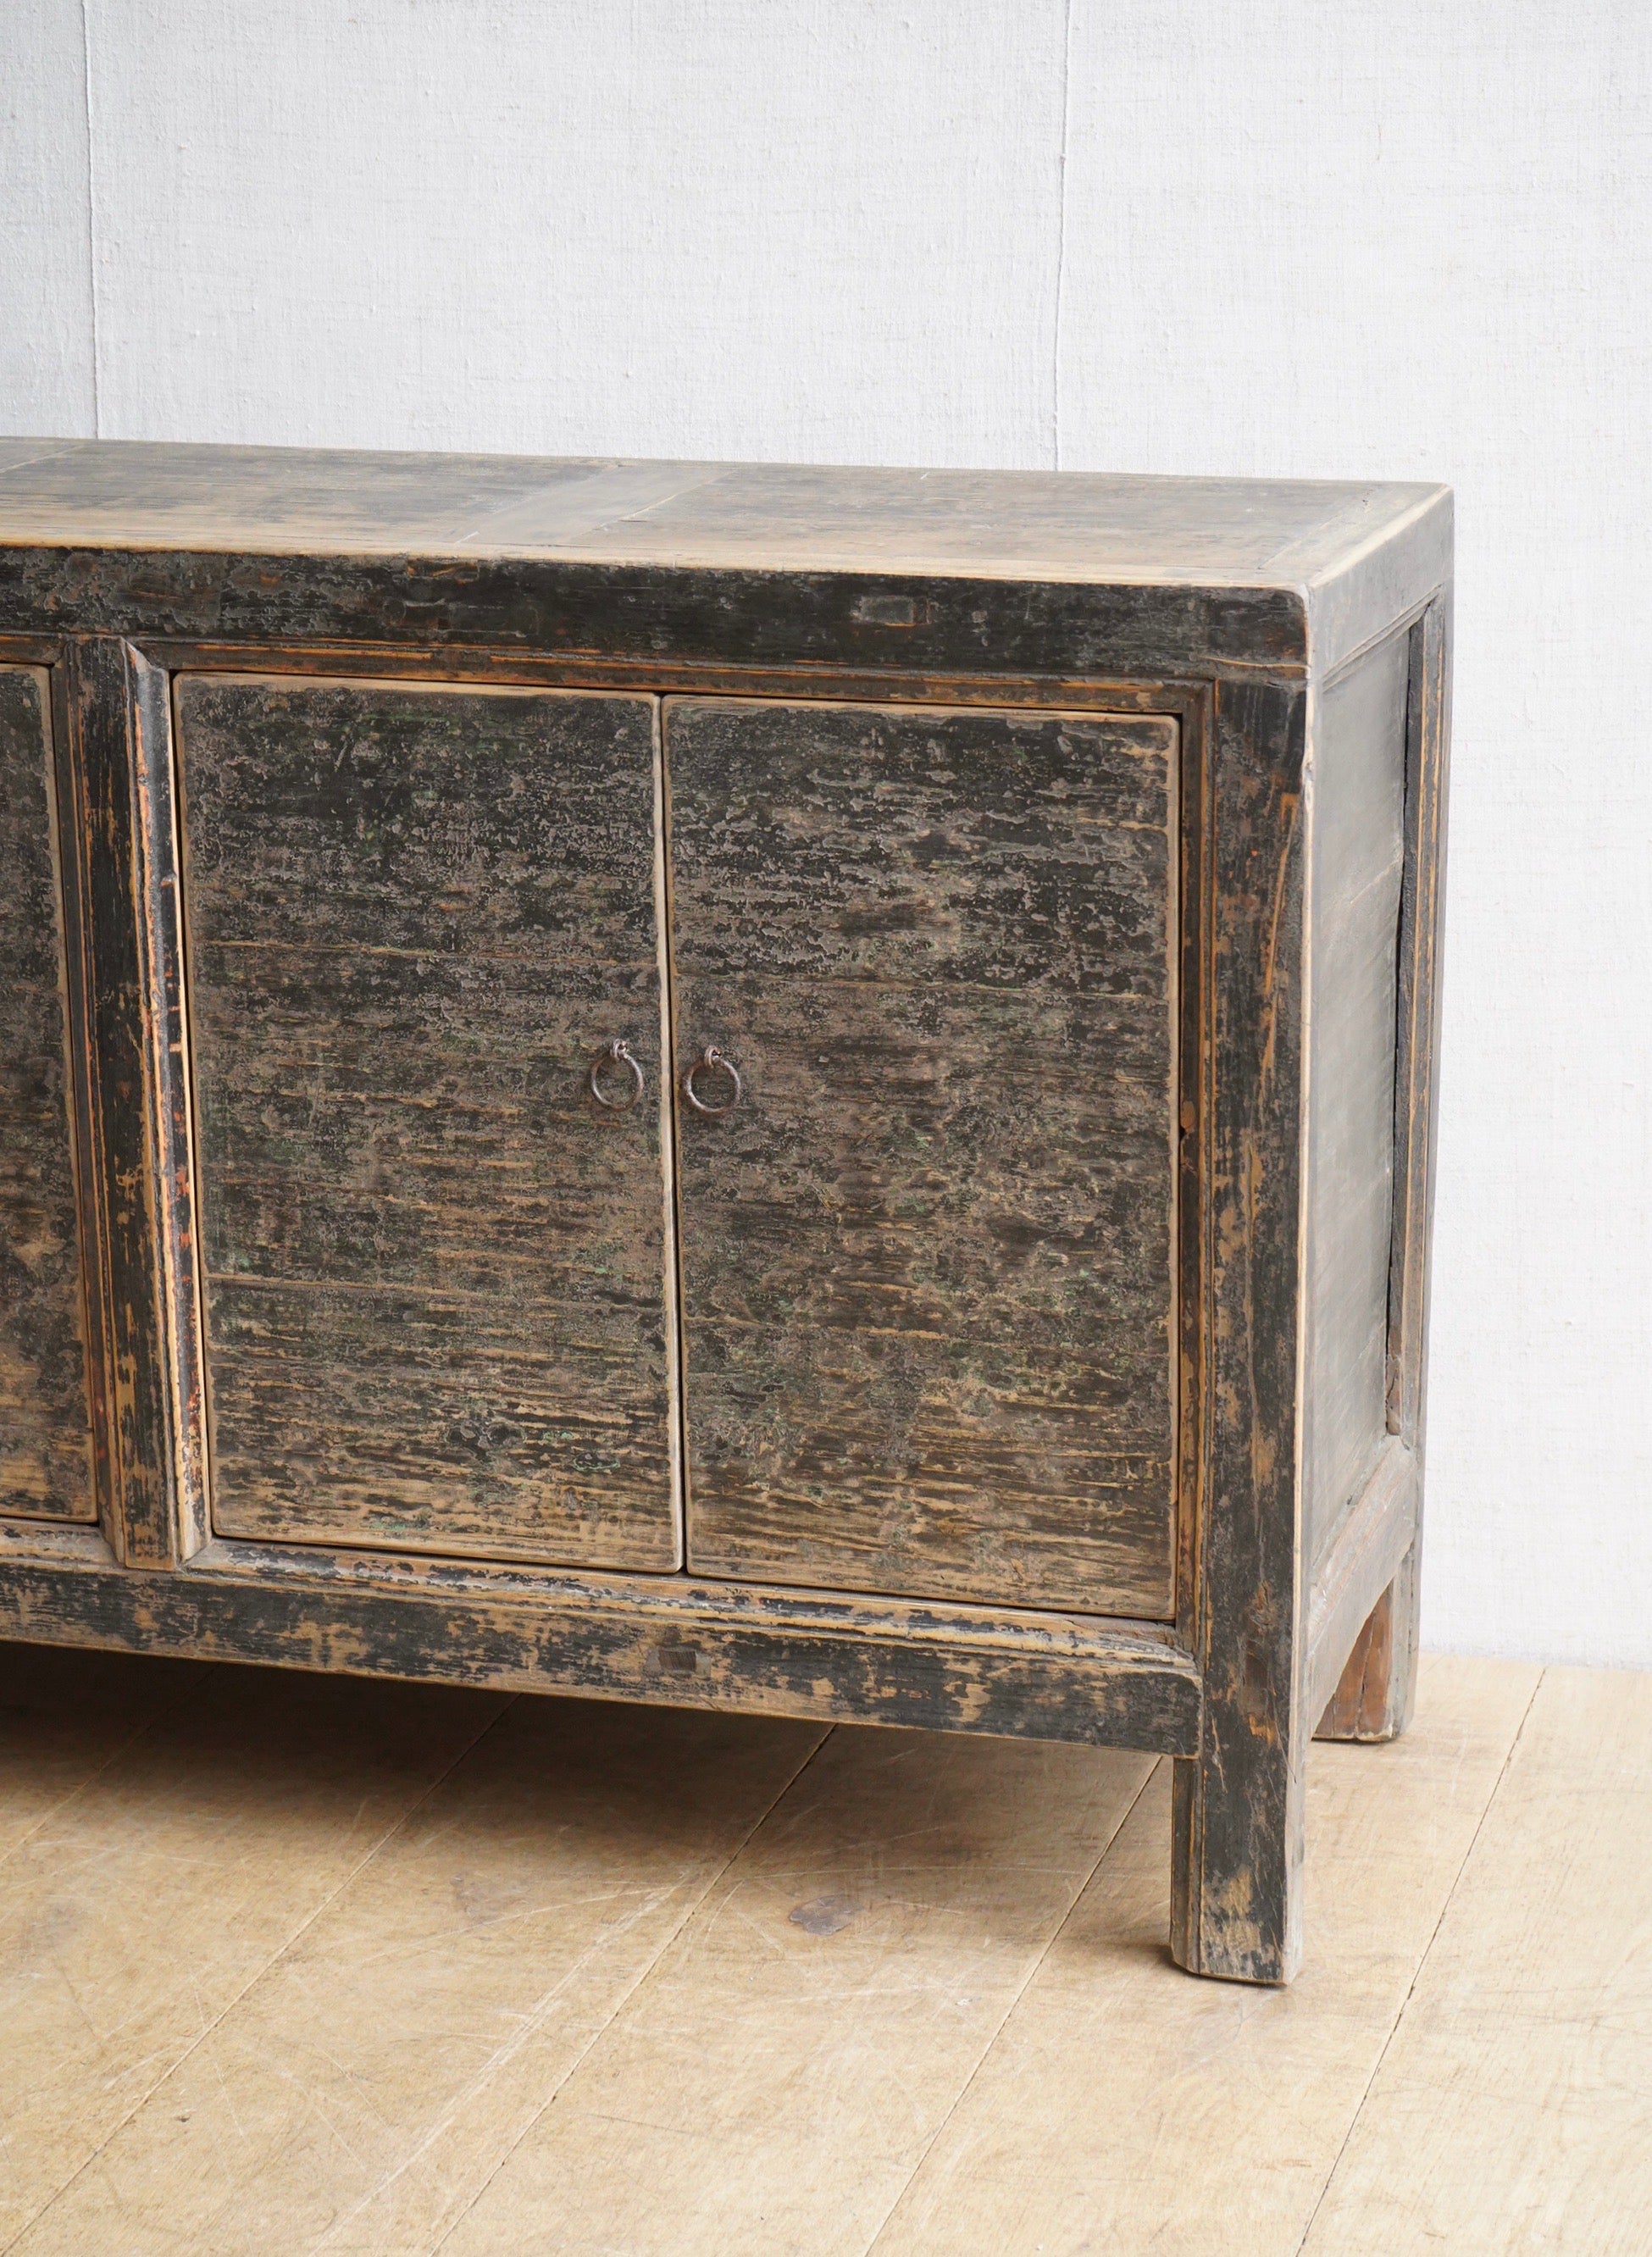 Chinese 19c Sideboard